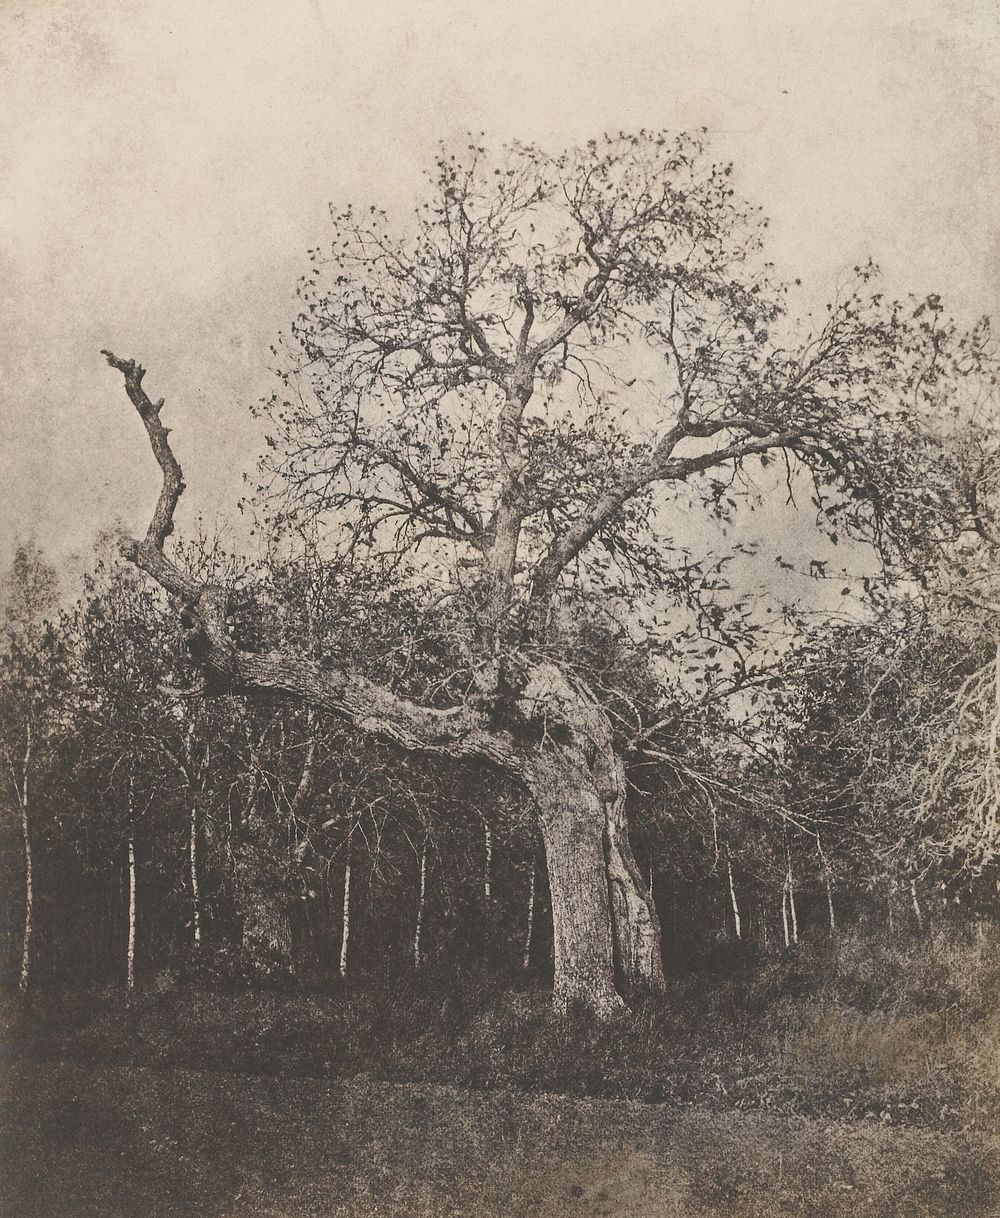 Crooked Tree with Sparse Leaves by Louis Désiré Blanquart Evrard